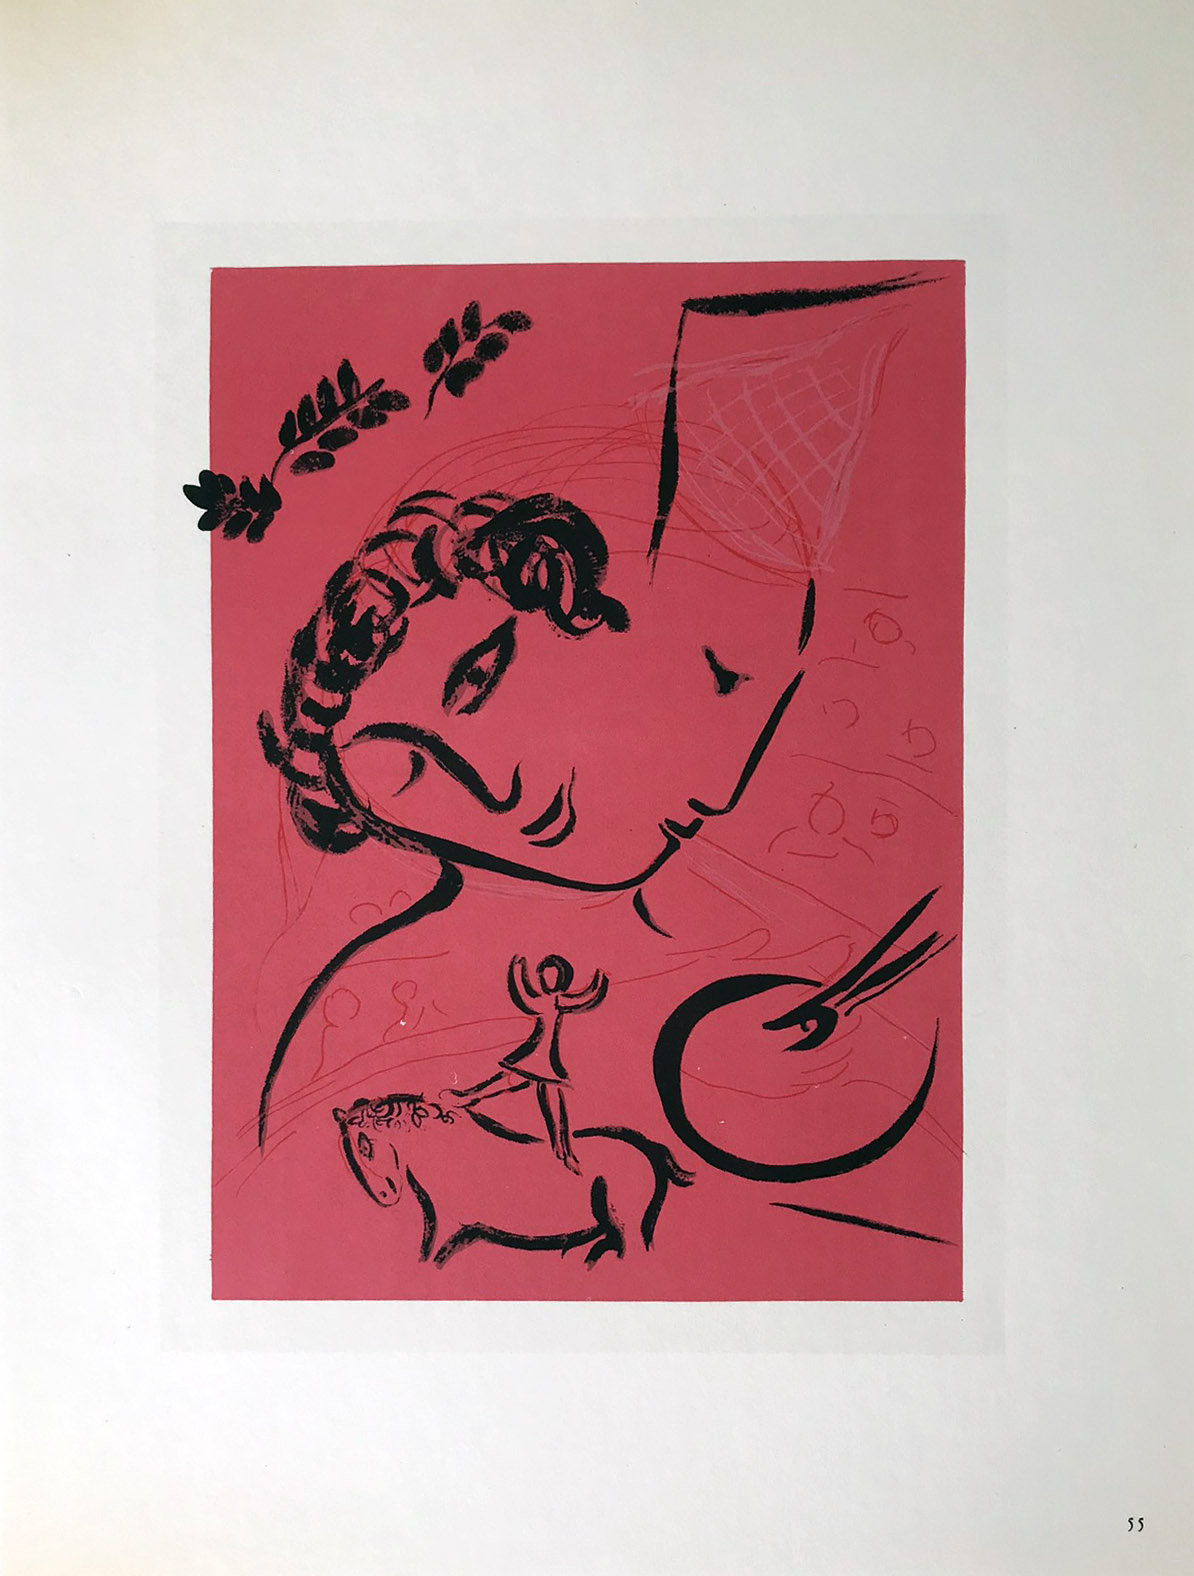 Marc Chagall, from Lithograph vol 2, 1960 Sorlier